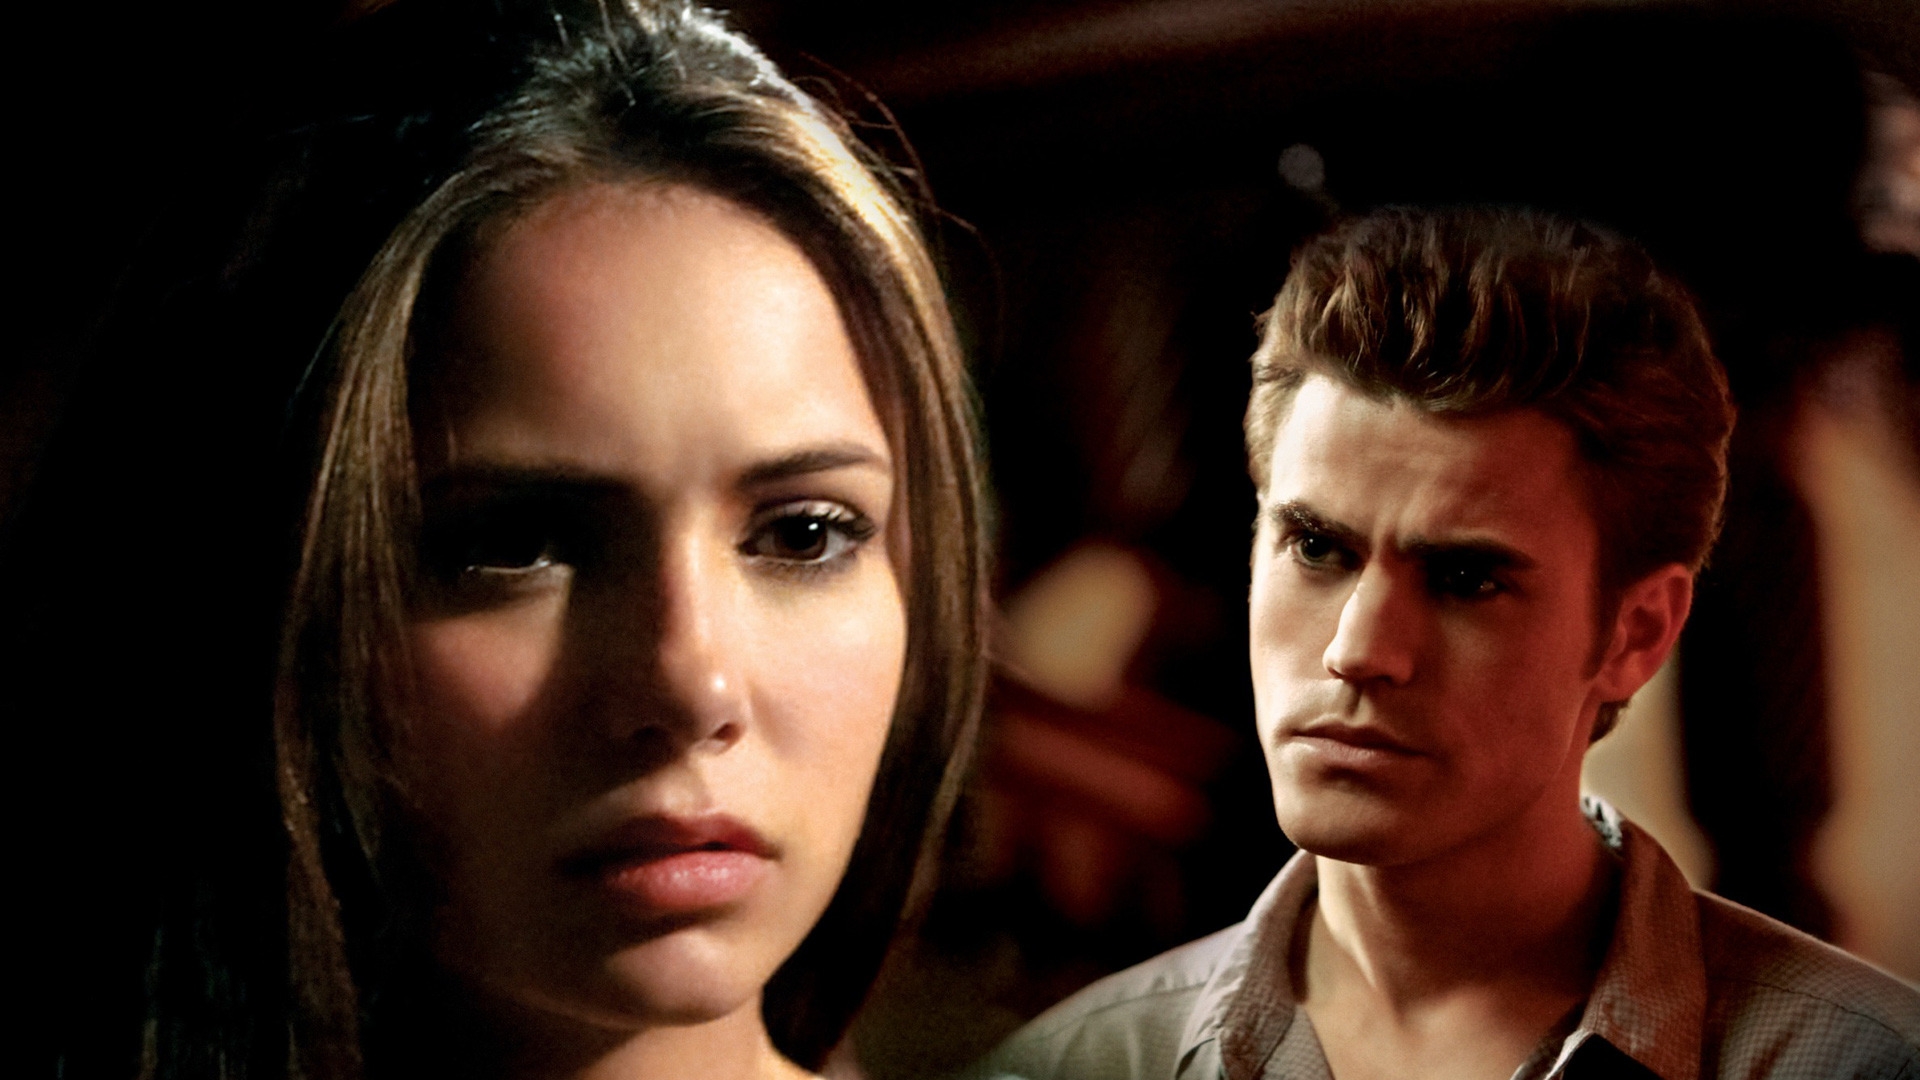 Vampire Diaries Main Characters for 1920 x 1080 HDTV 1080p resolution